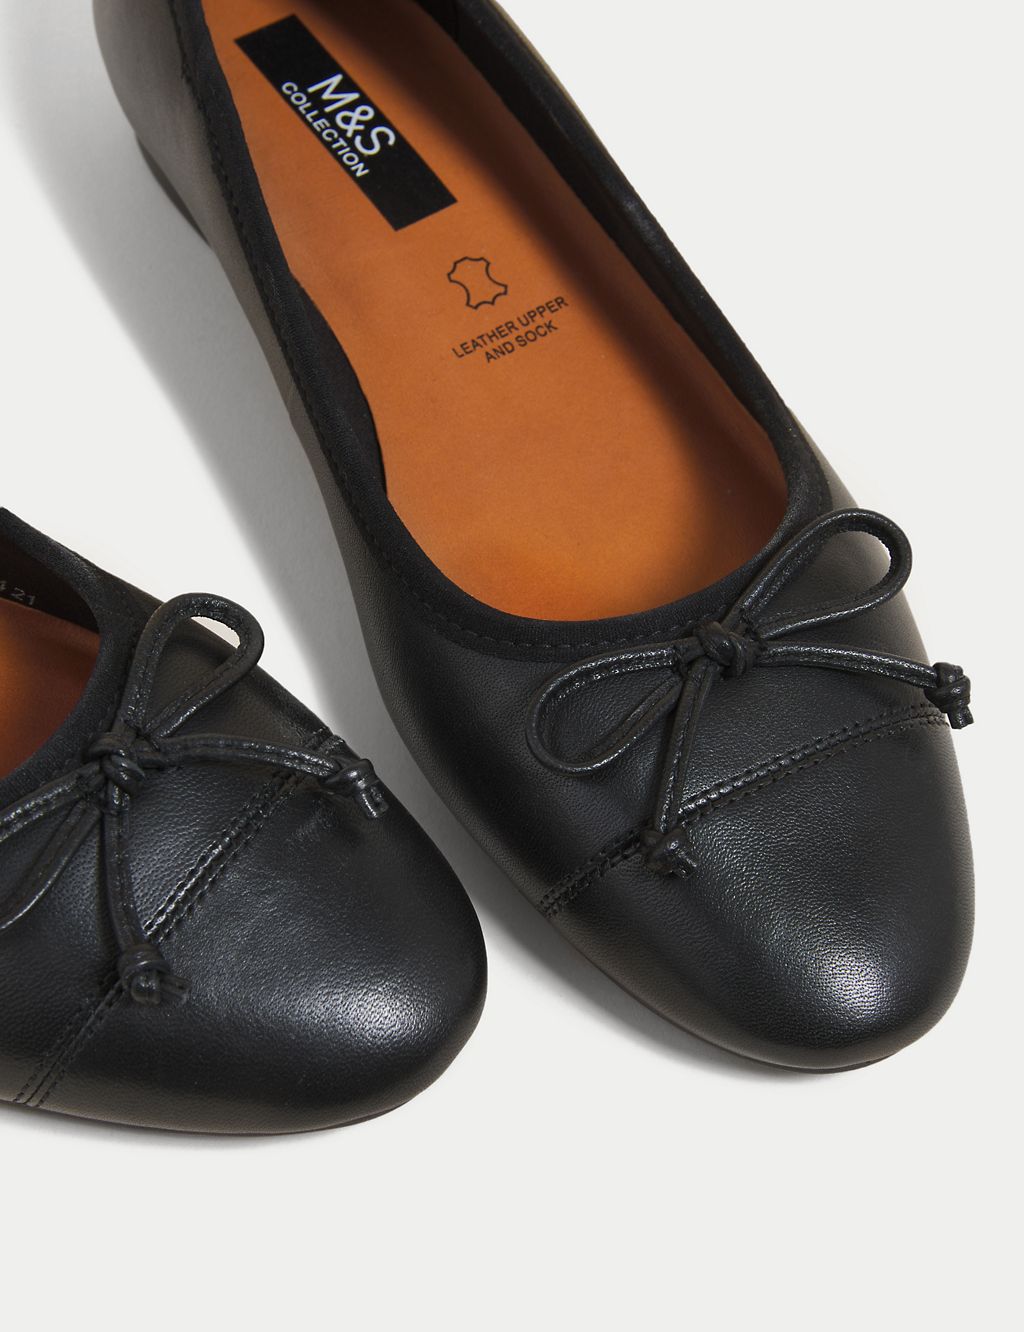 Leather Bow Ballet Pumps 4 of 6